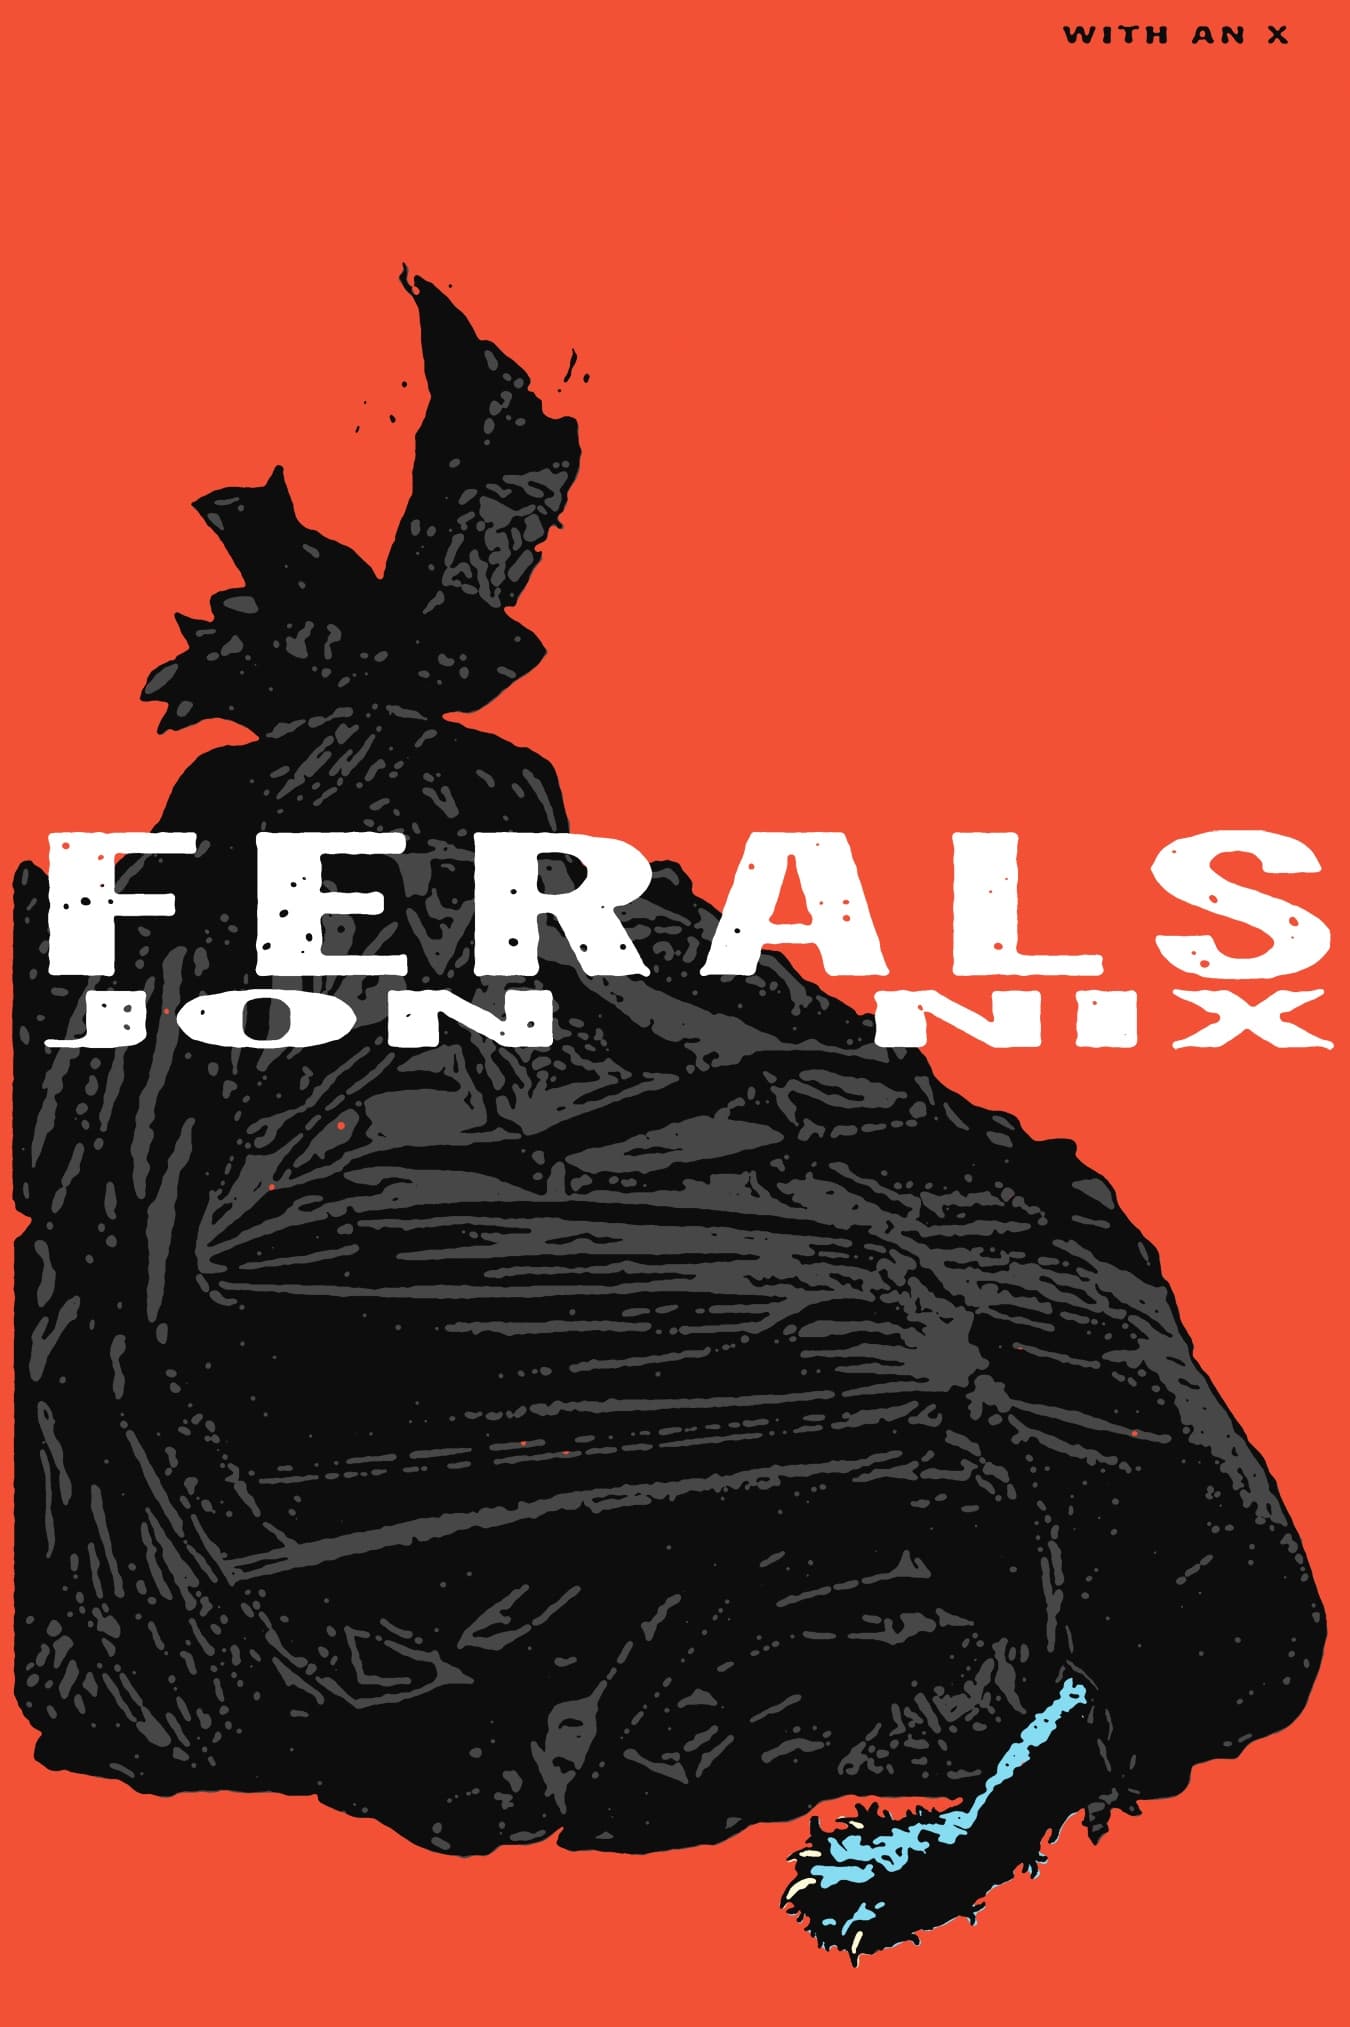 Poster for the movie "Ferals"